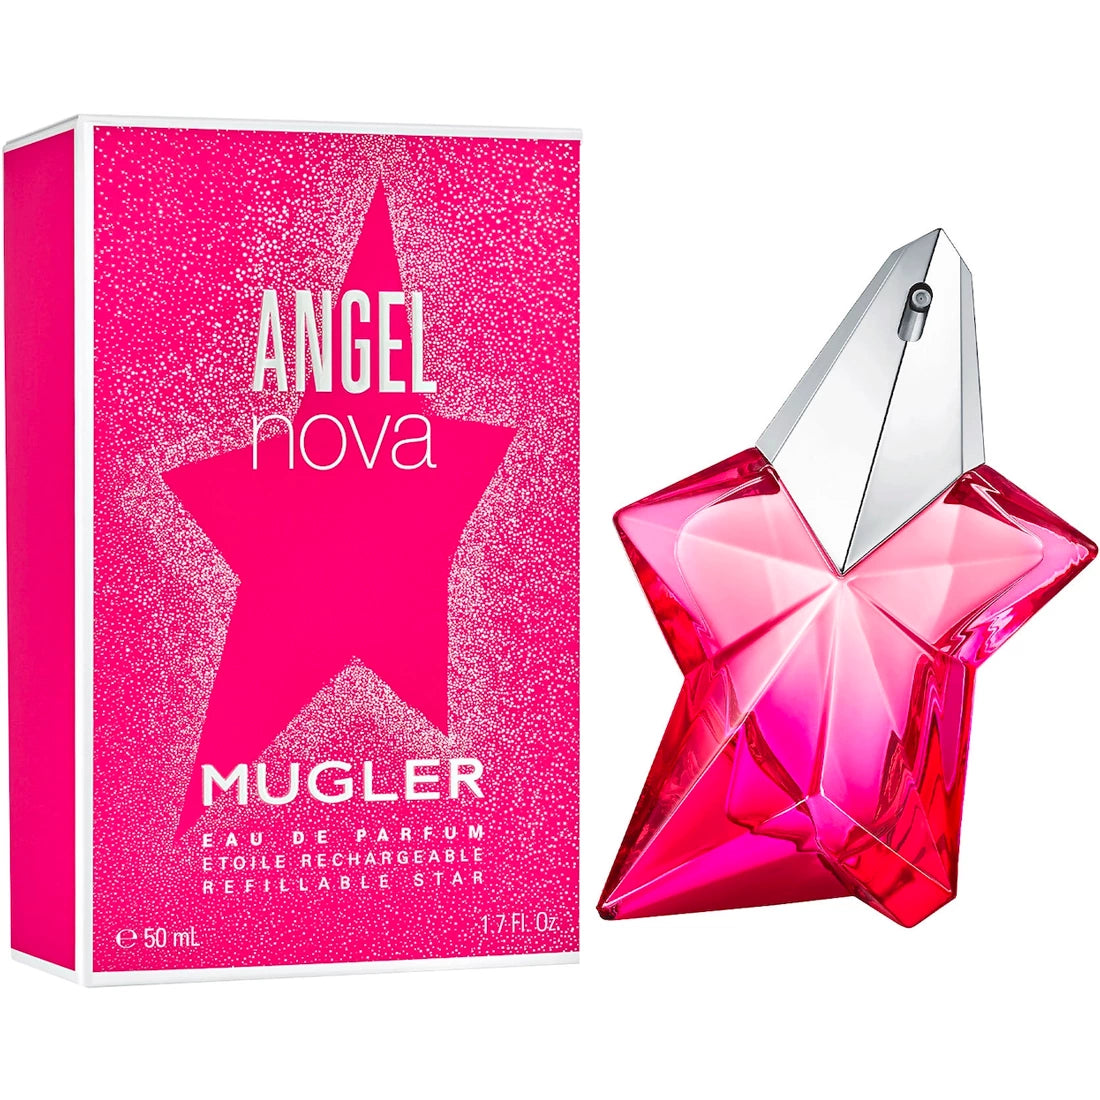 <meta charset="utf-8"><span data-mce-fragment="1">Angel Nova Perfume by Thierry Mugler, Designed by perfumers louise turner, sonia constant and quentin bisch, angel nova is a sweet and fresh, fru</span><span class="yZlgBd" data-mce-fragment="1">ity tropical scent for women. Top notes are an irresistible blend of ripest raspberry mingled with sweet, succulent litchi fruit. Lovely damask rose and crisp nuances of violet embrace the heart, followed by a sensual, lingering base of richly woody akigalawood, patchouli and benzoin.</span>